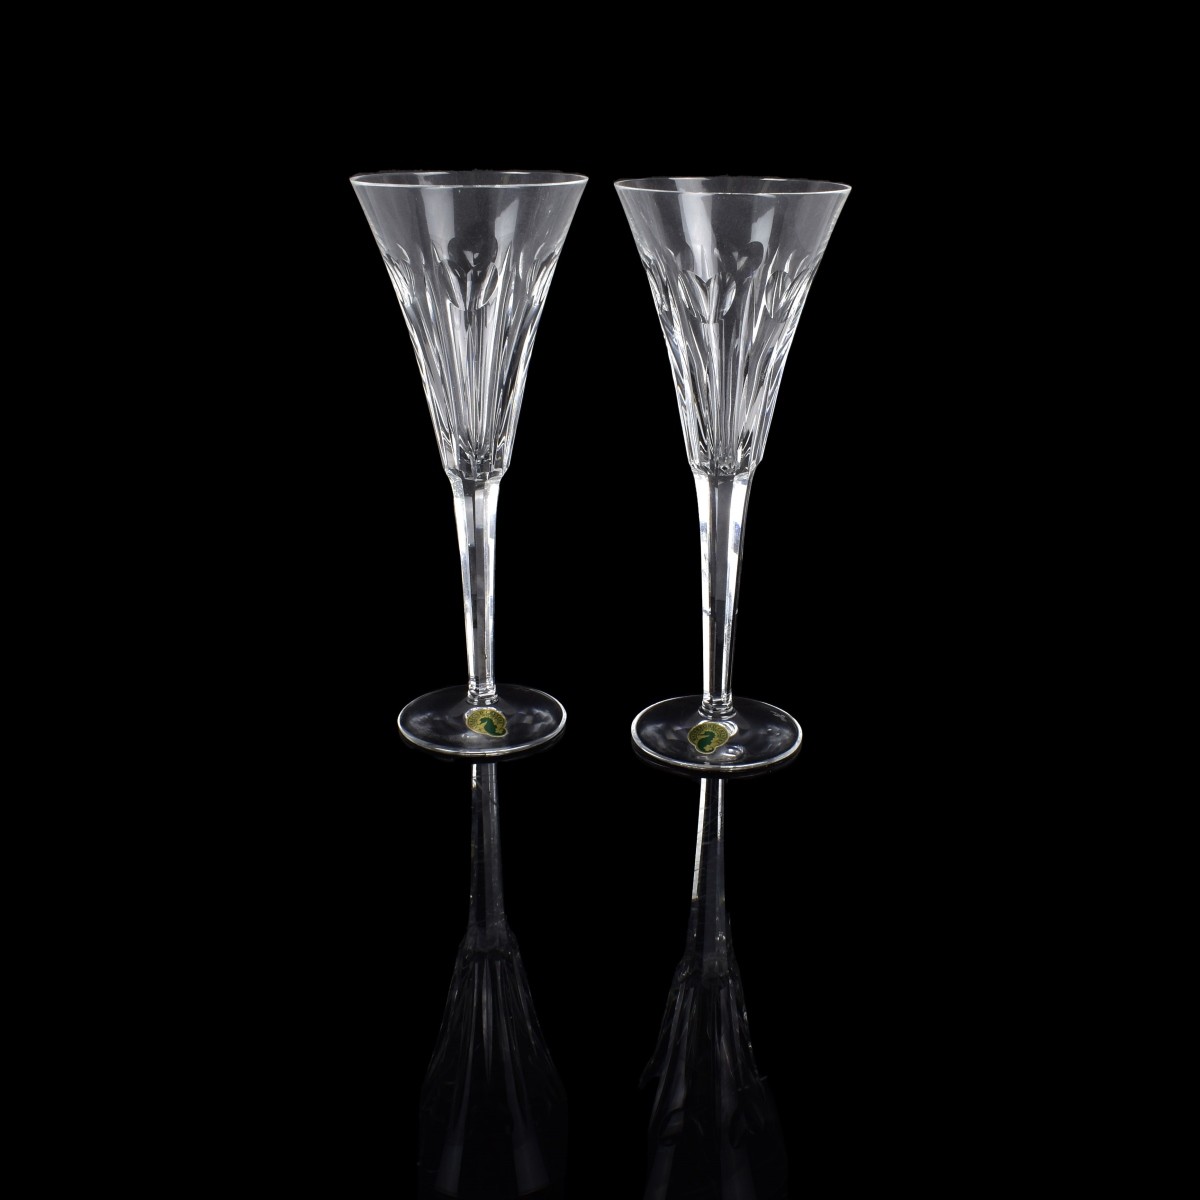 Pair of Waterford Toasting Flutes